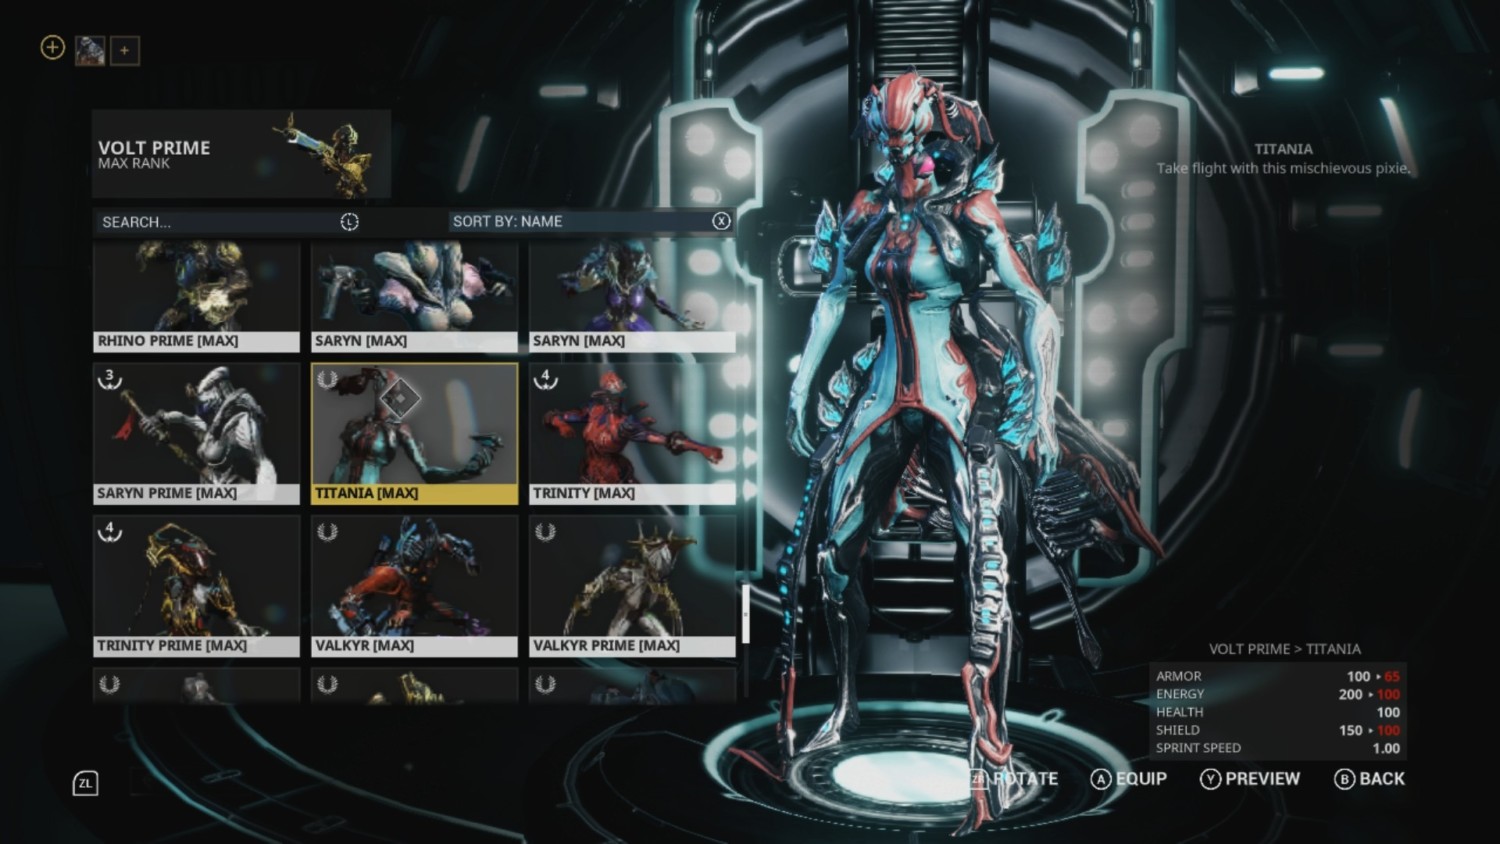 How can I chat in Warframe? – WARFRAME Support